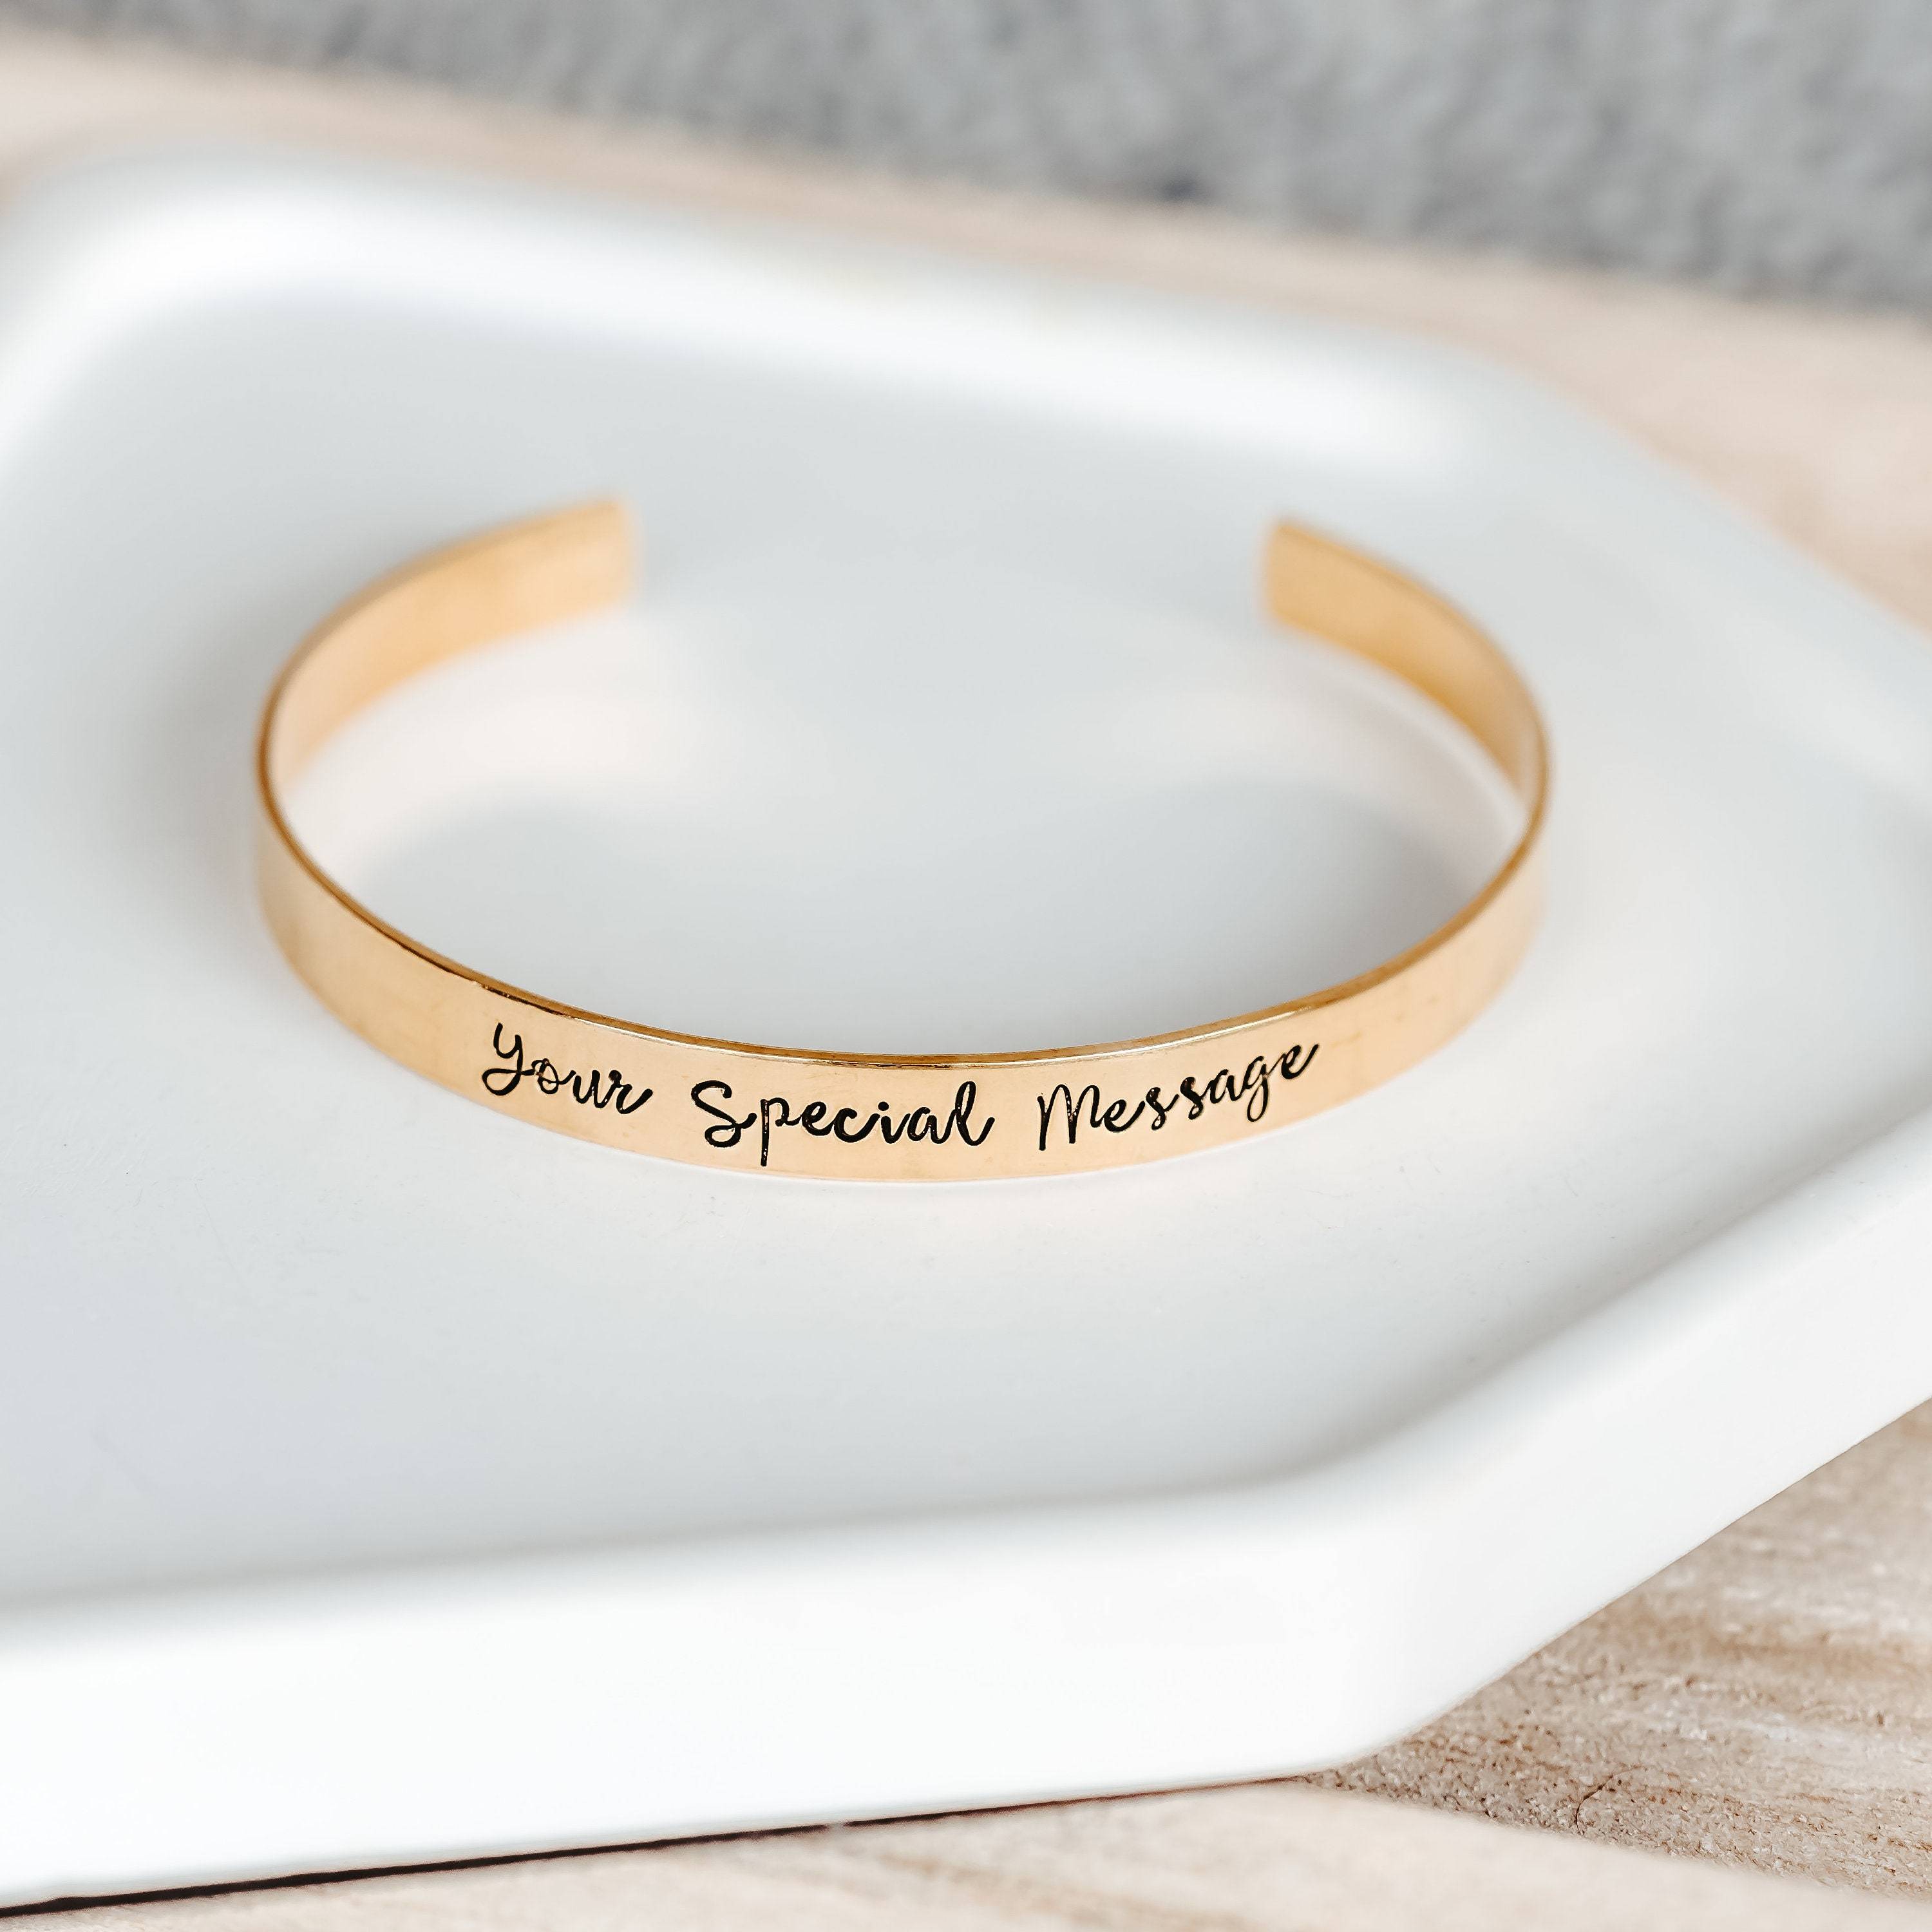 Personalized Solid 14k Gold Cuff Bracelet Salt and Sparkle